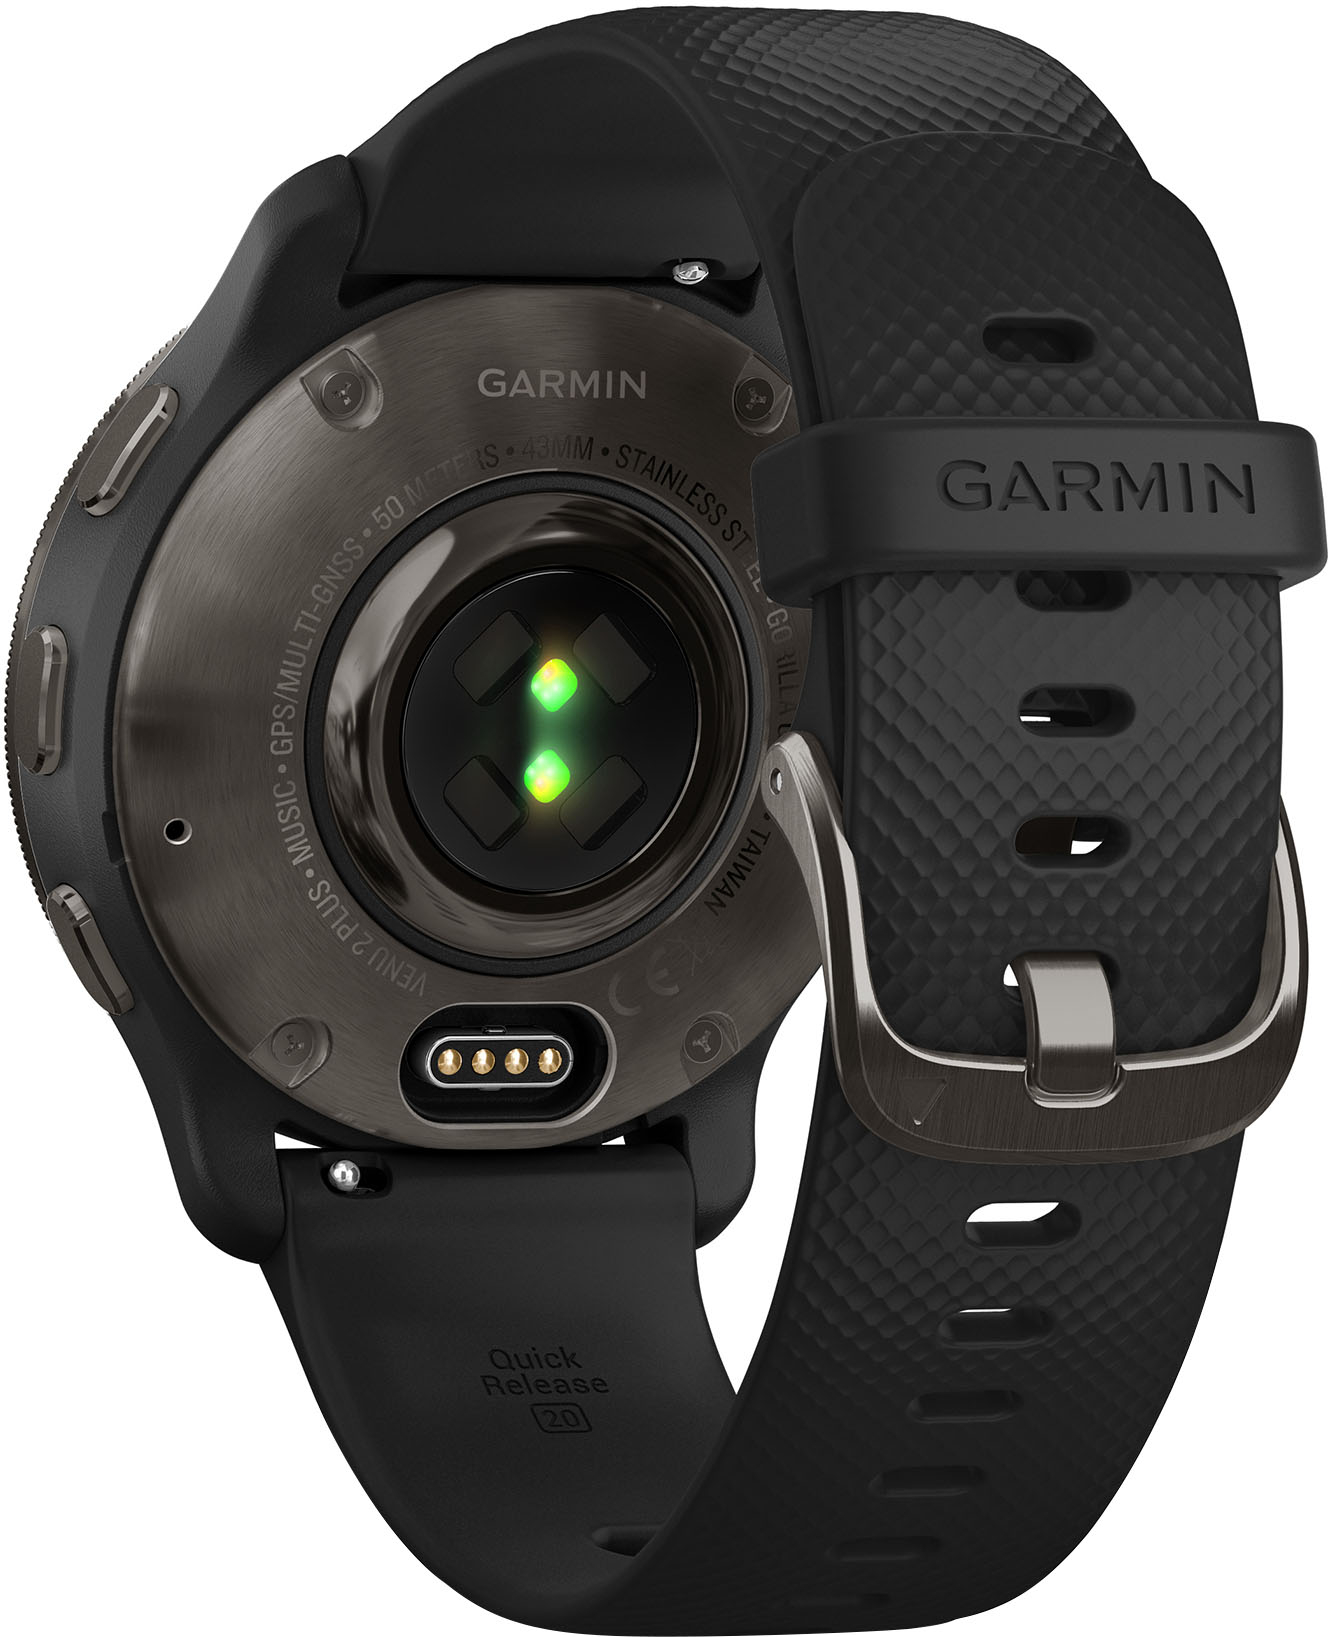 Which smart voice assistants work with the Garmin Venu 2 Plus?